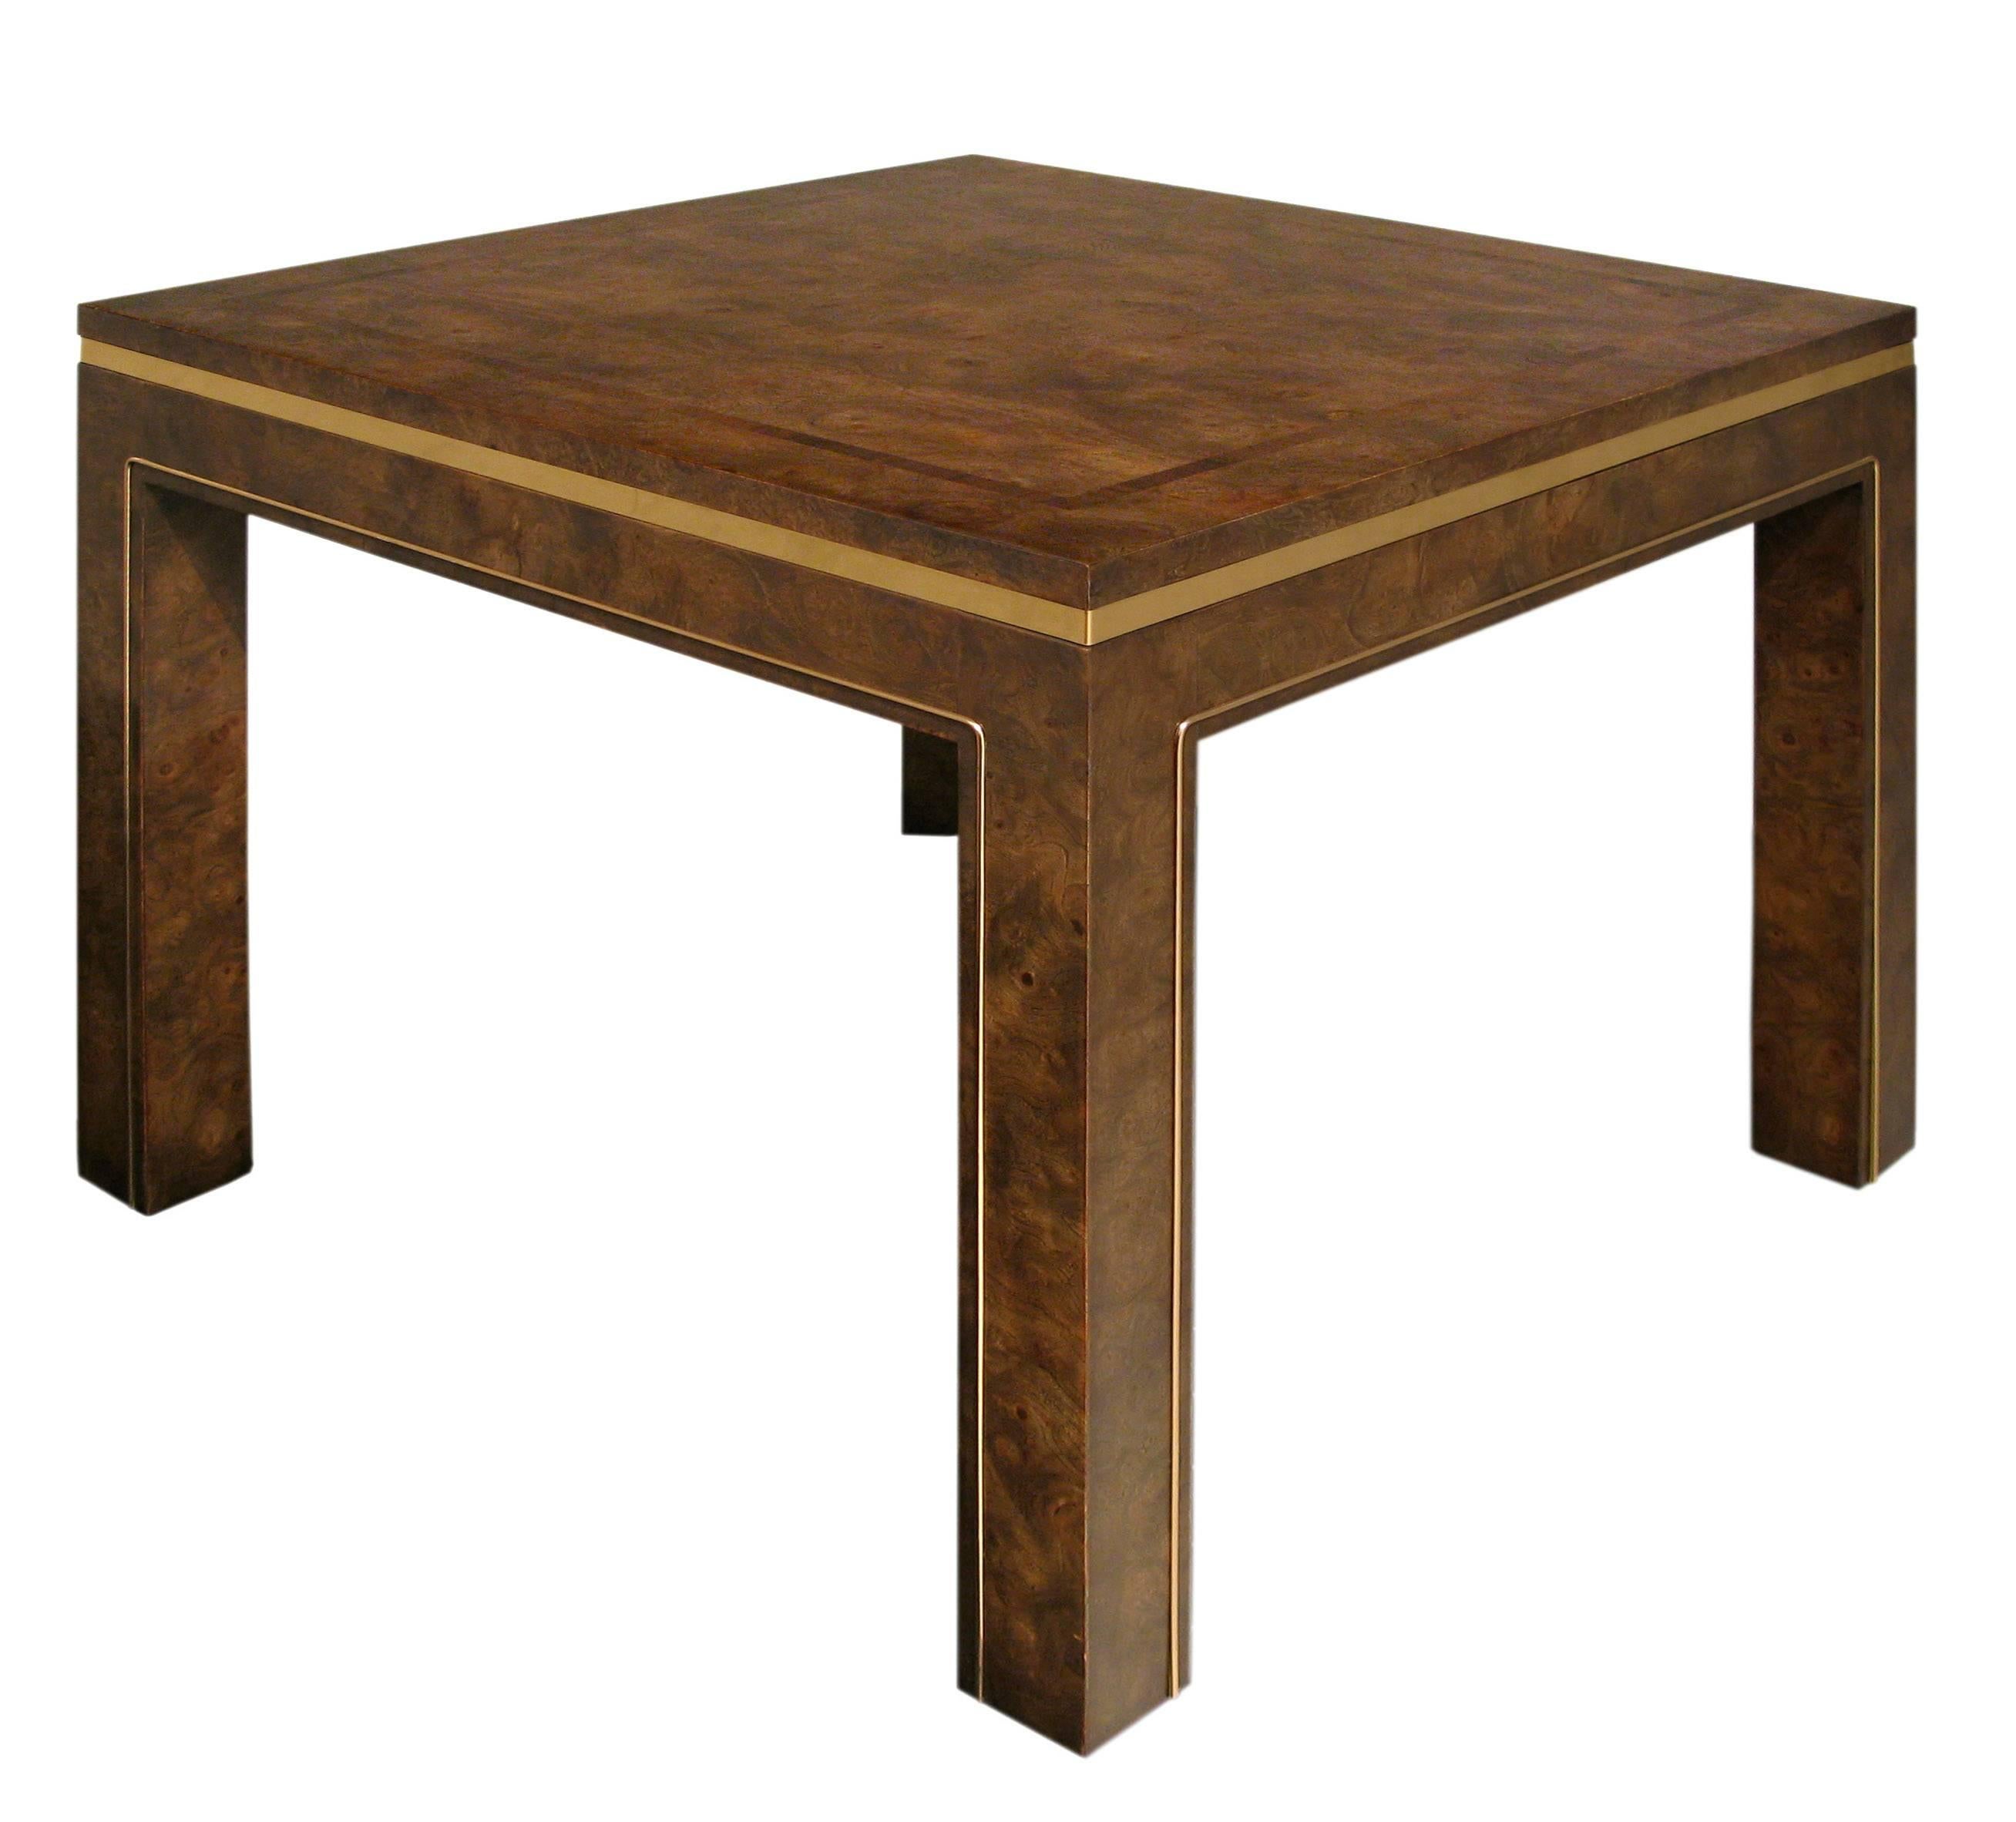 Beautifully crafted end tables in Maidou burl with brass inlays by Mastercraft, American 1970s.
